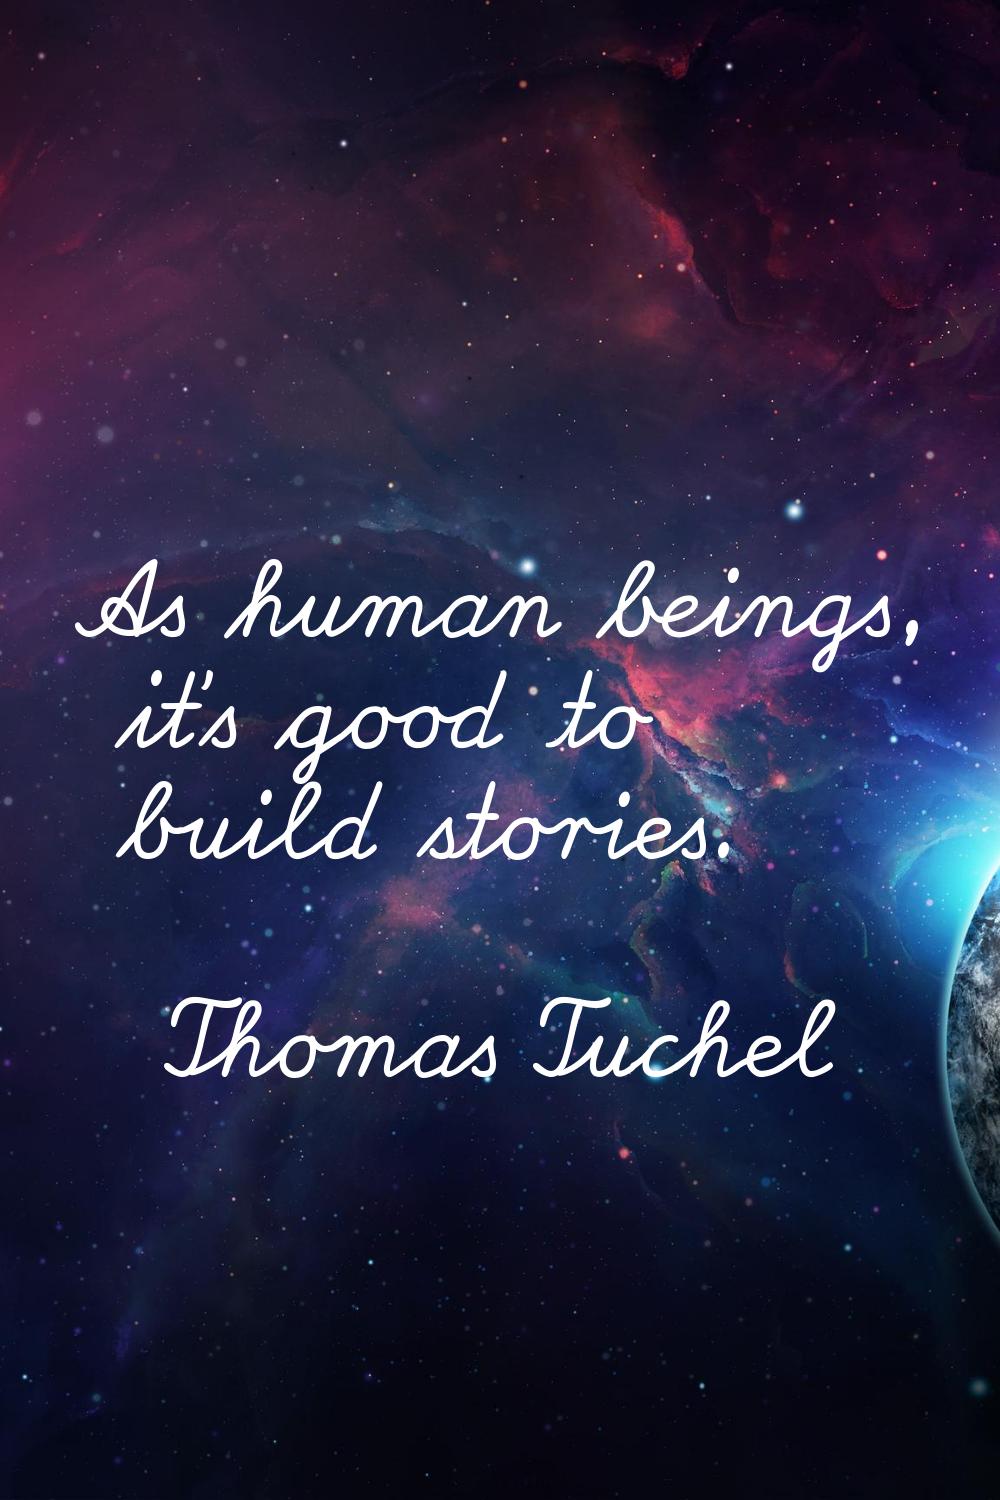 As human beings, it's good to build stories.